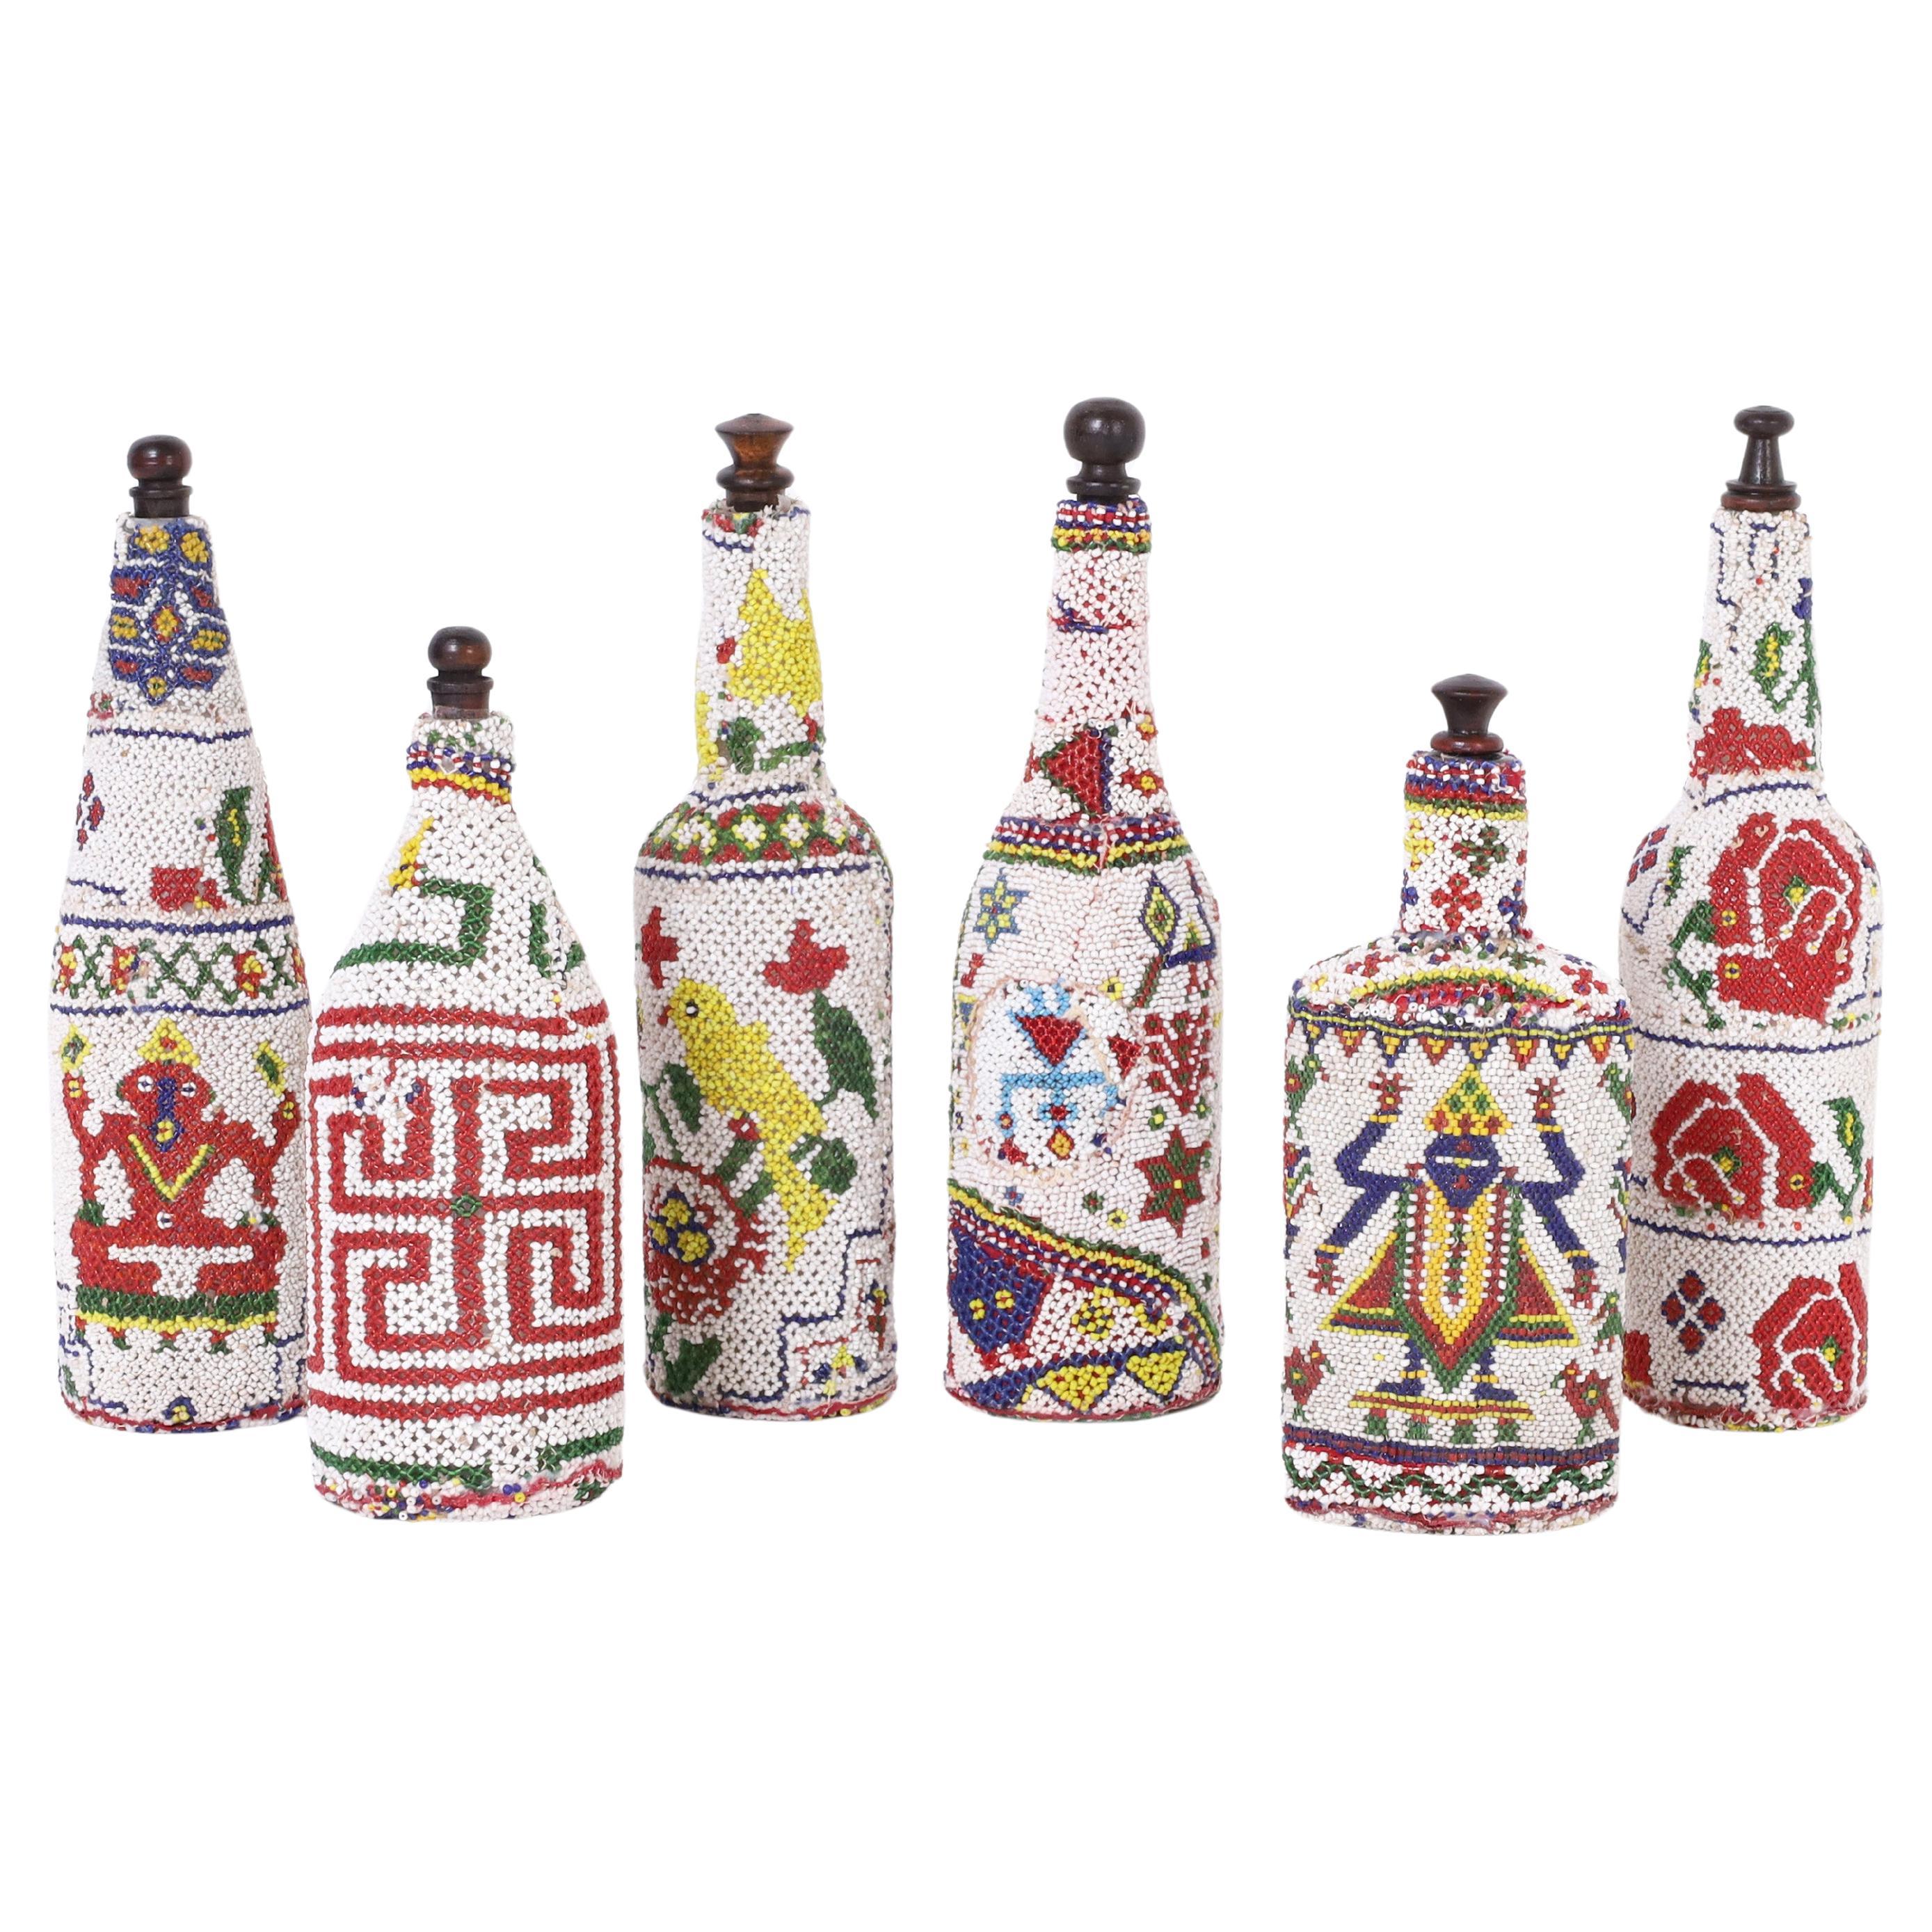 Group of FOUR Vintage African Beaded Bottles, Priced Individually